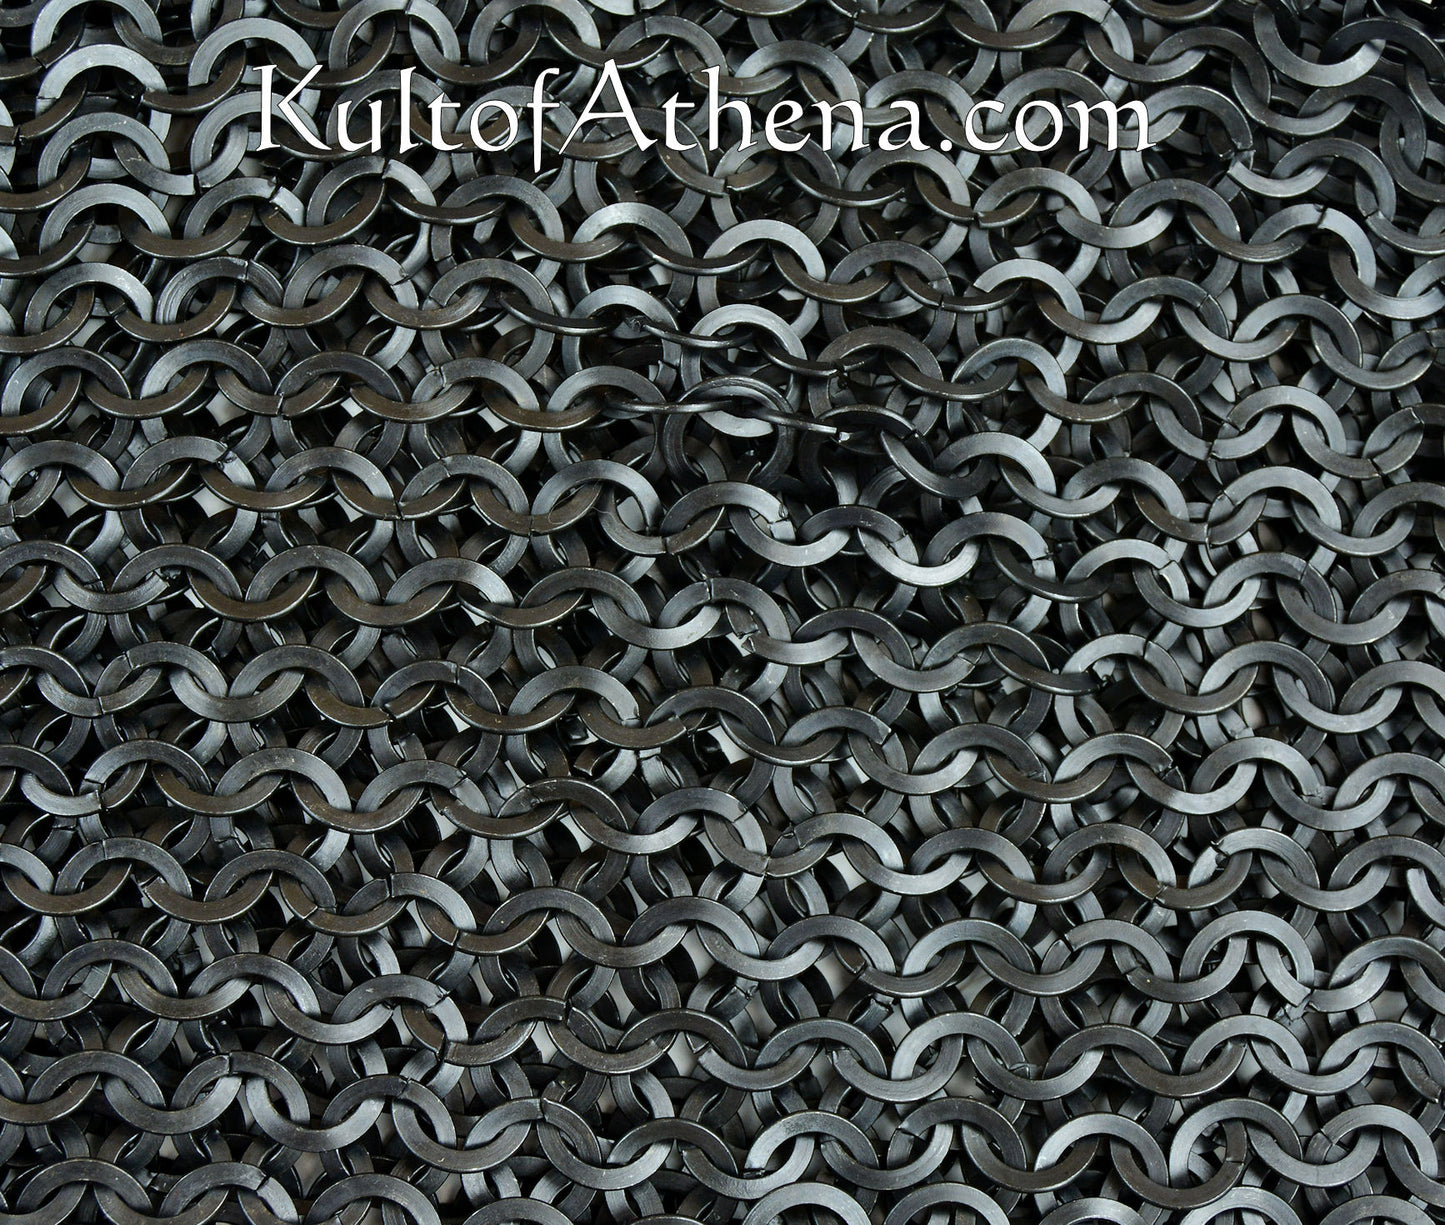 BFBM Chainmail Leggings - Butted Flat Rings - Blackened Finish